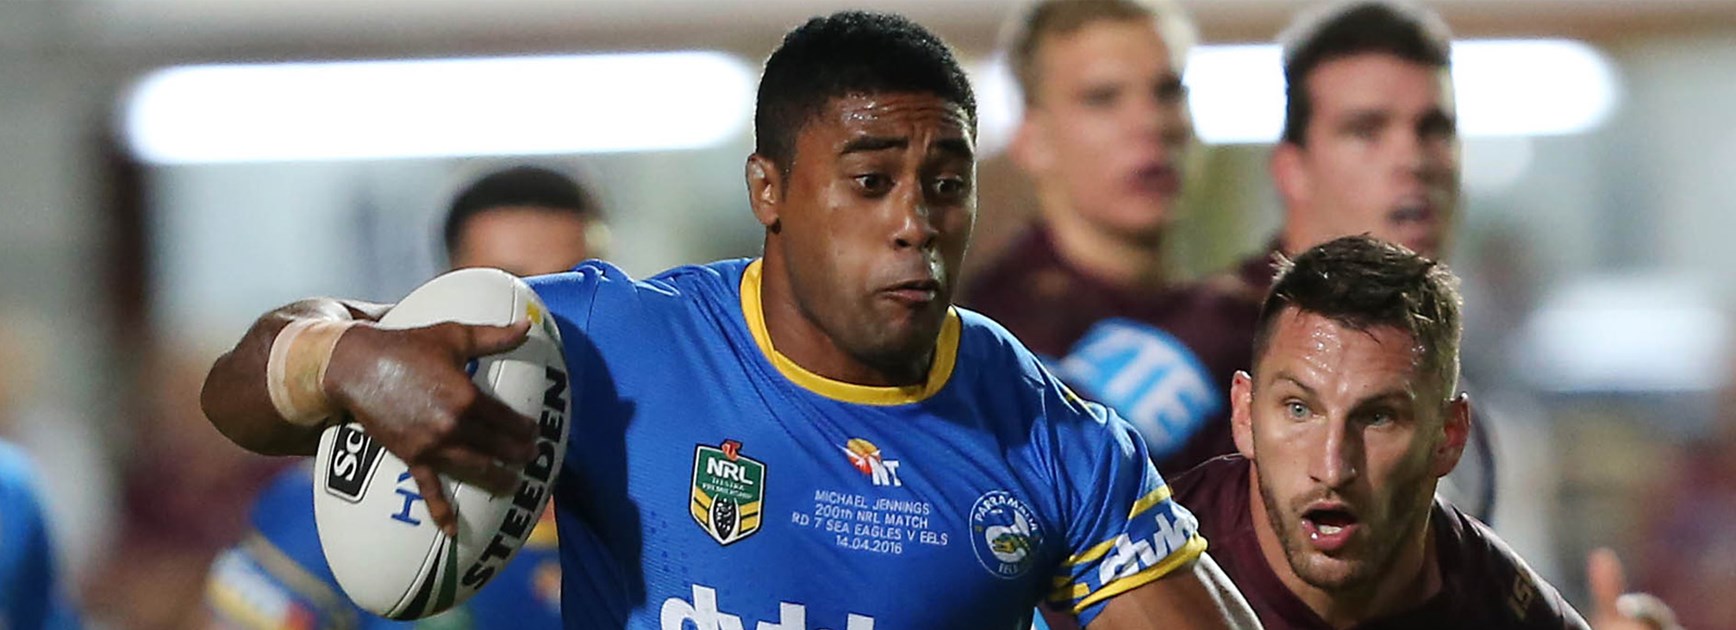 Michael Jennings scored a double for Parramatta against the Sea Eagles in Round 7.